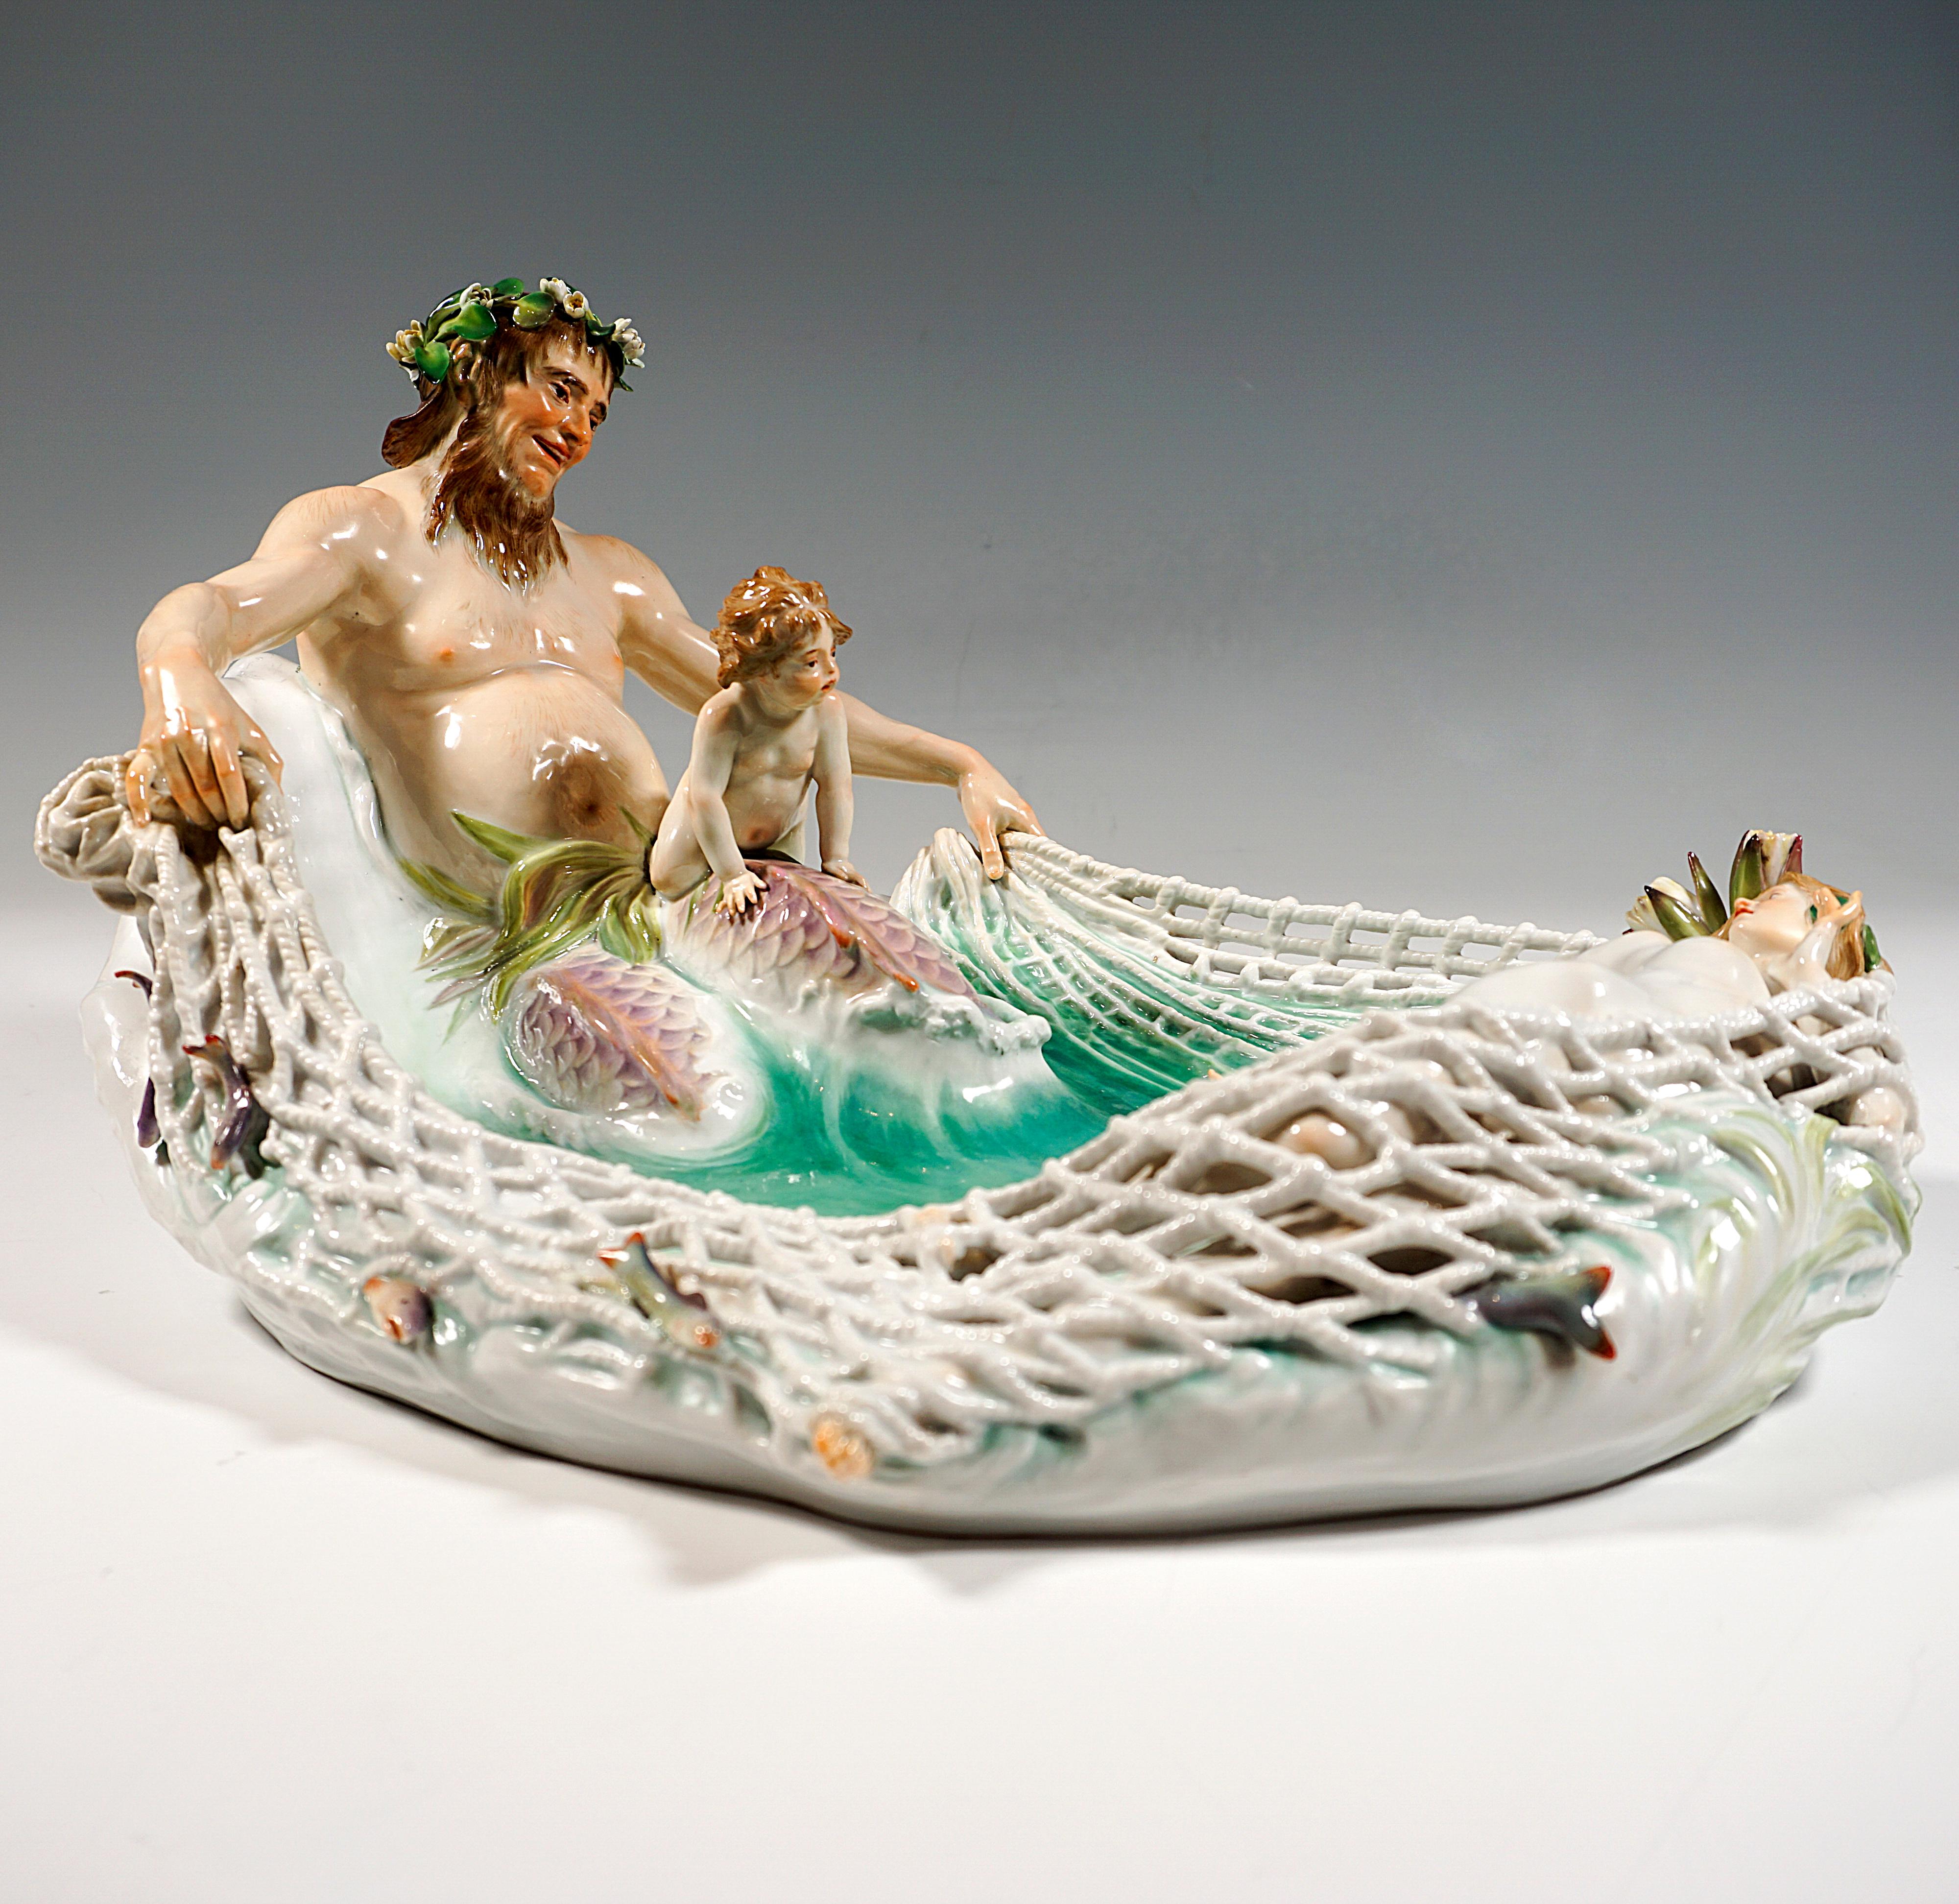 Exquisite large and rare Meissen Art Nouveau porcelain group:
Triton adorned with water lily wreath on his head, half man, half fish with scaled legs leaning against a high wave and with outstretched arms pulling the cast net to himself and